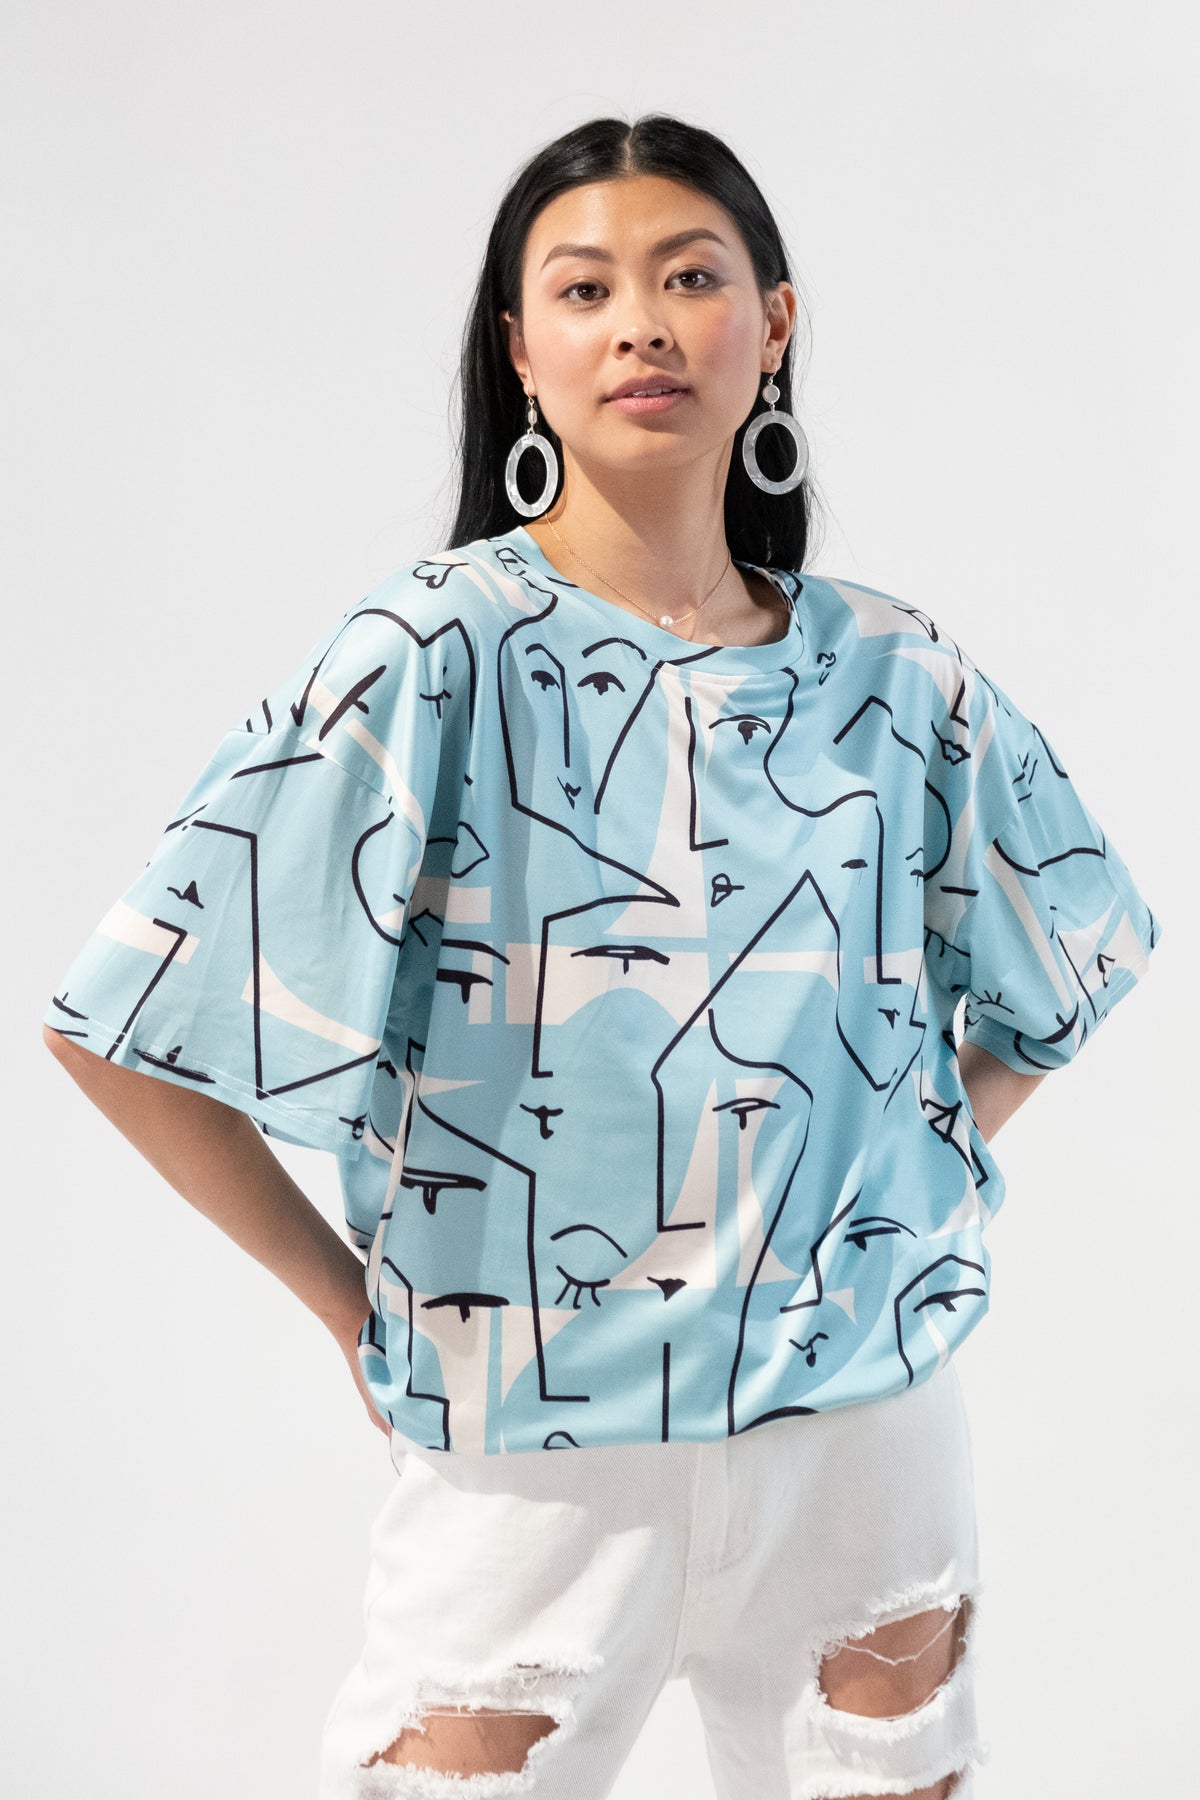 Model wearing a blue oversized t-shirt with an abstract faces graphic design